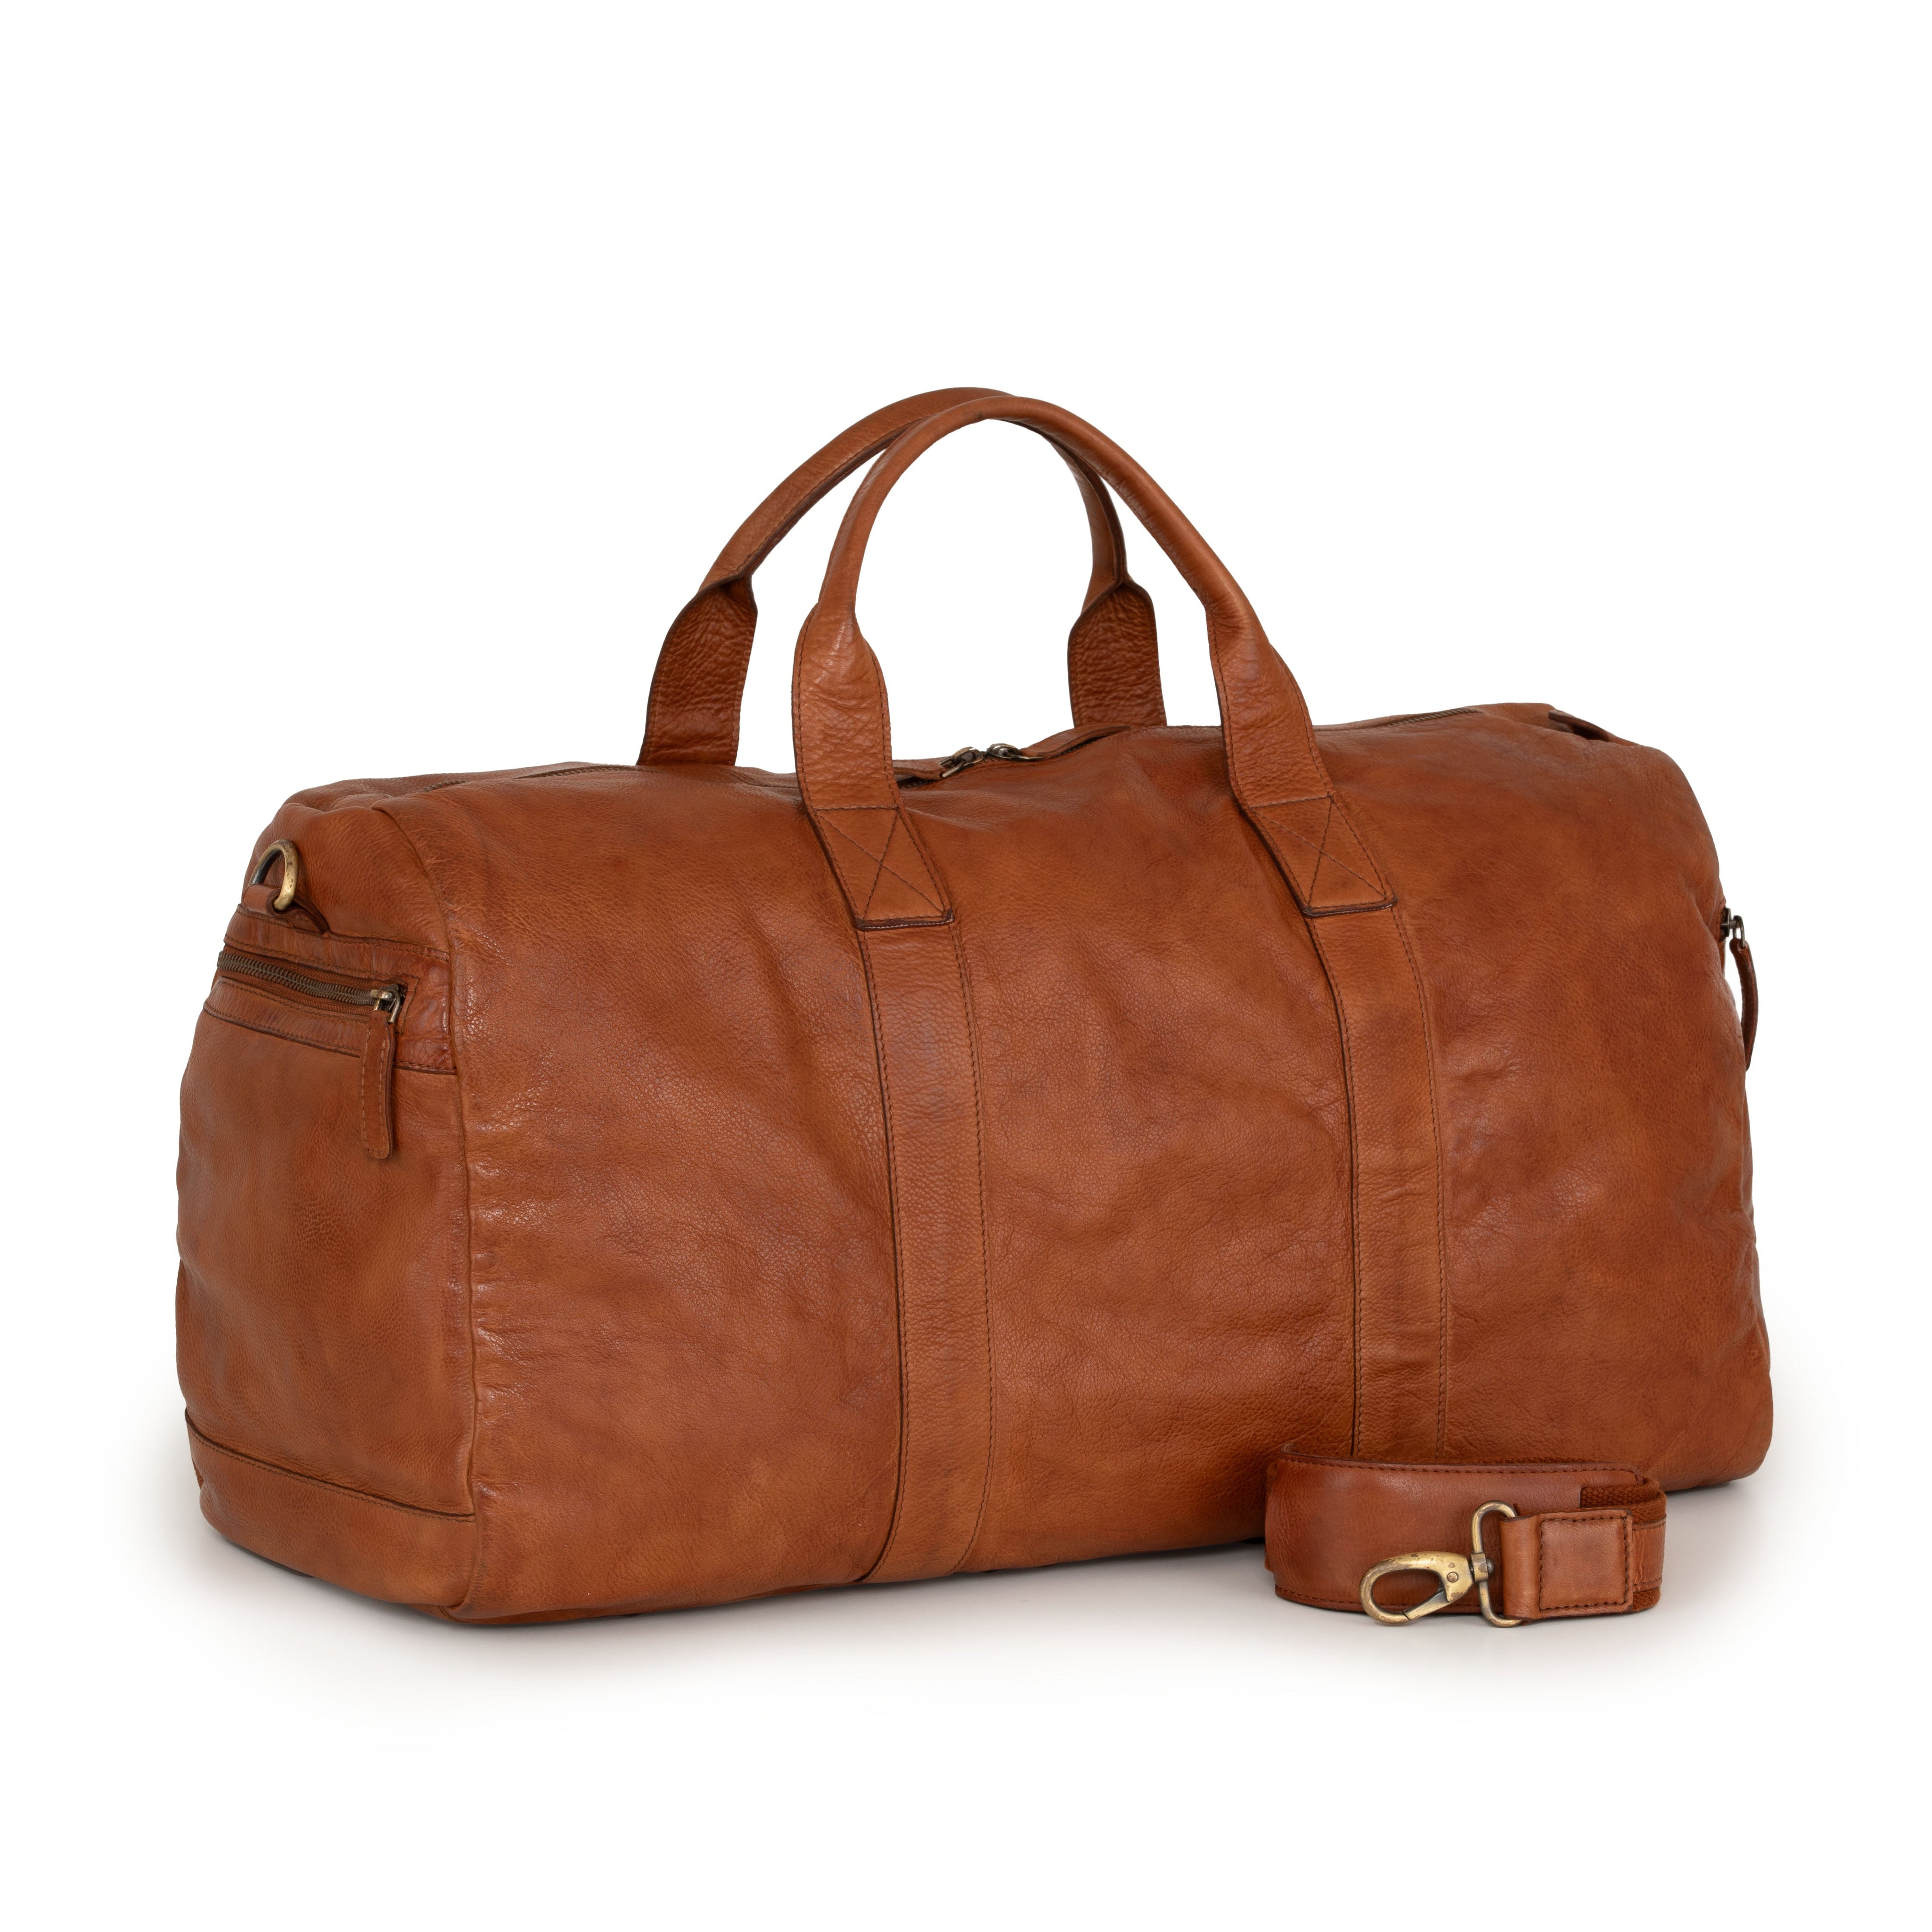 Gianni Conti Timothy Travel Bag - Vegetable-Tanned Leather